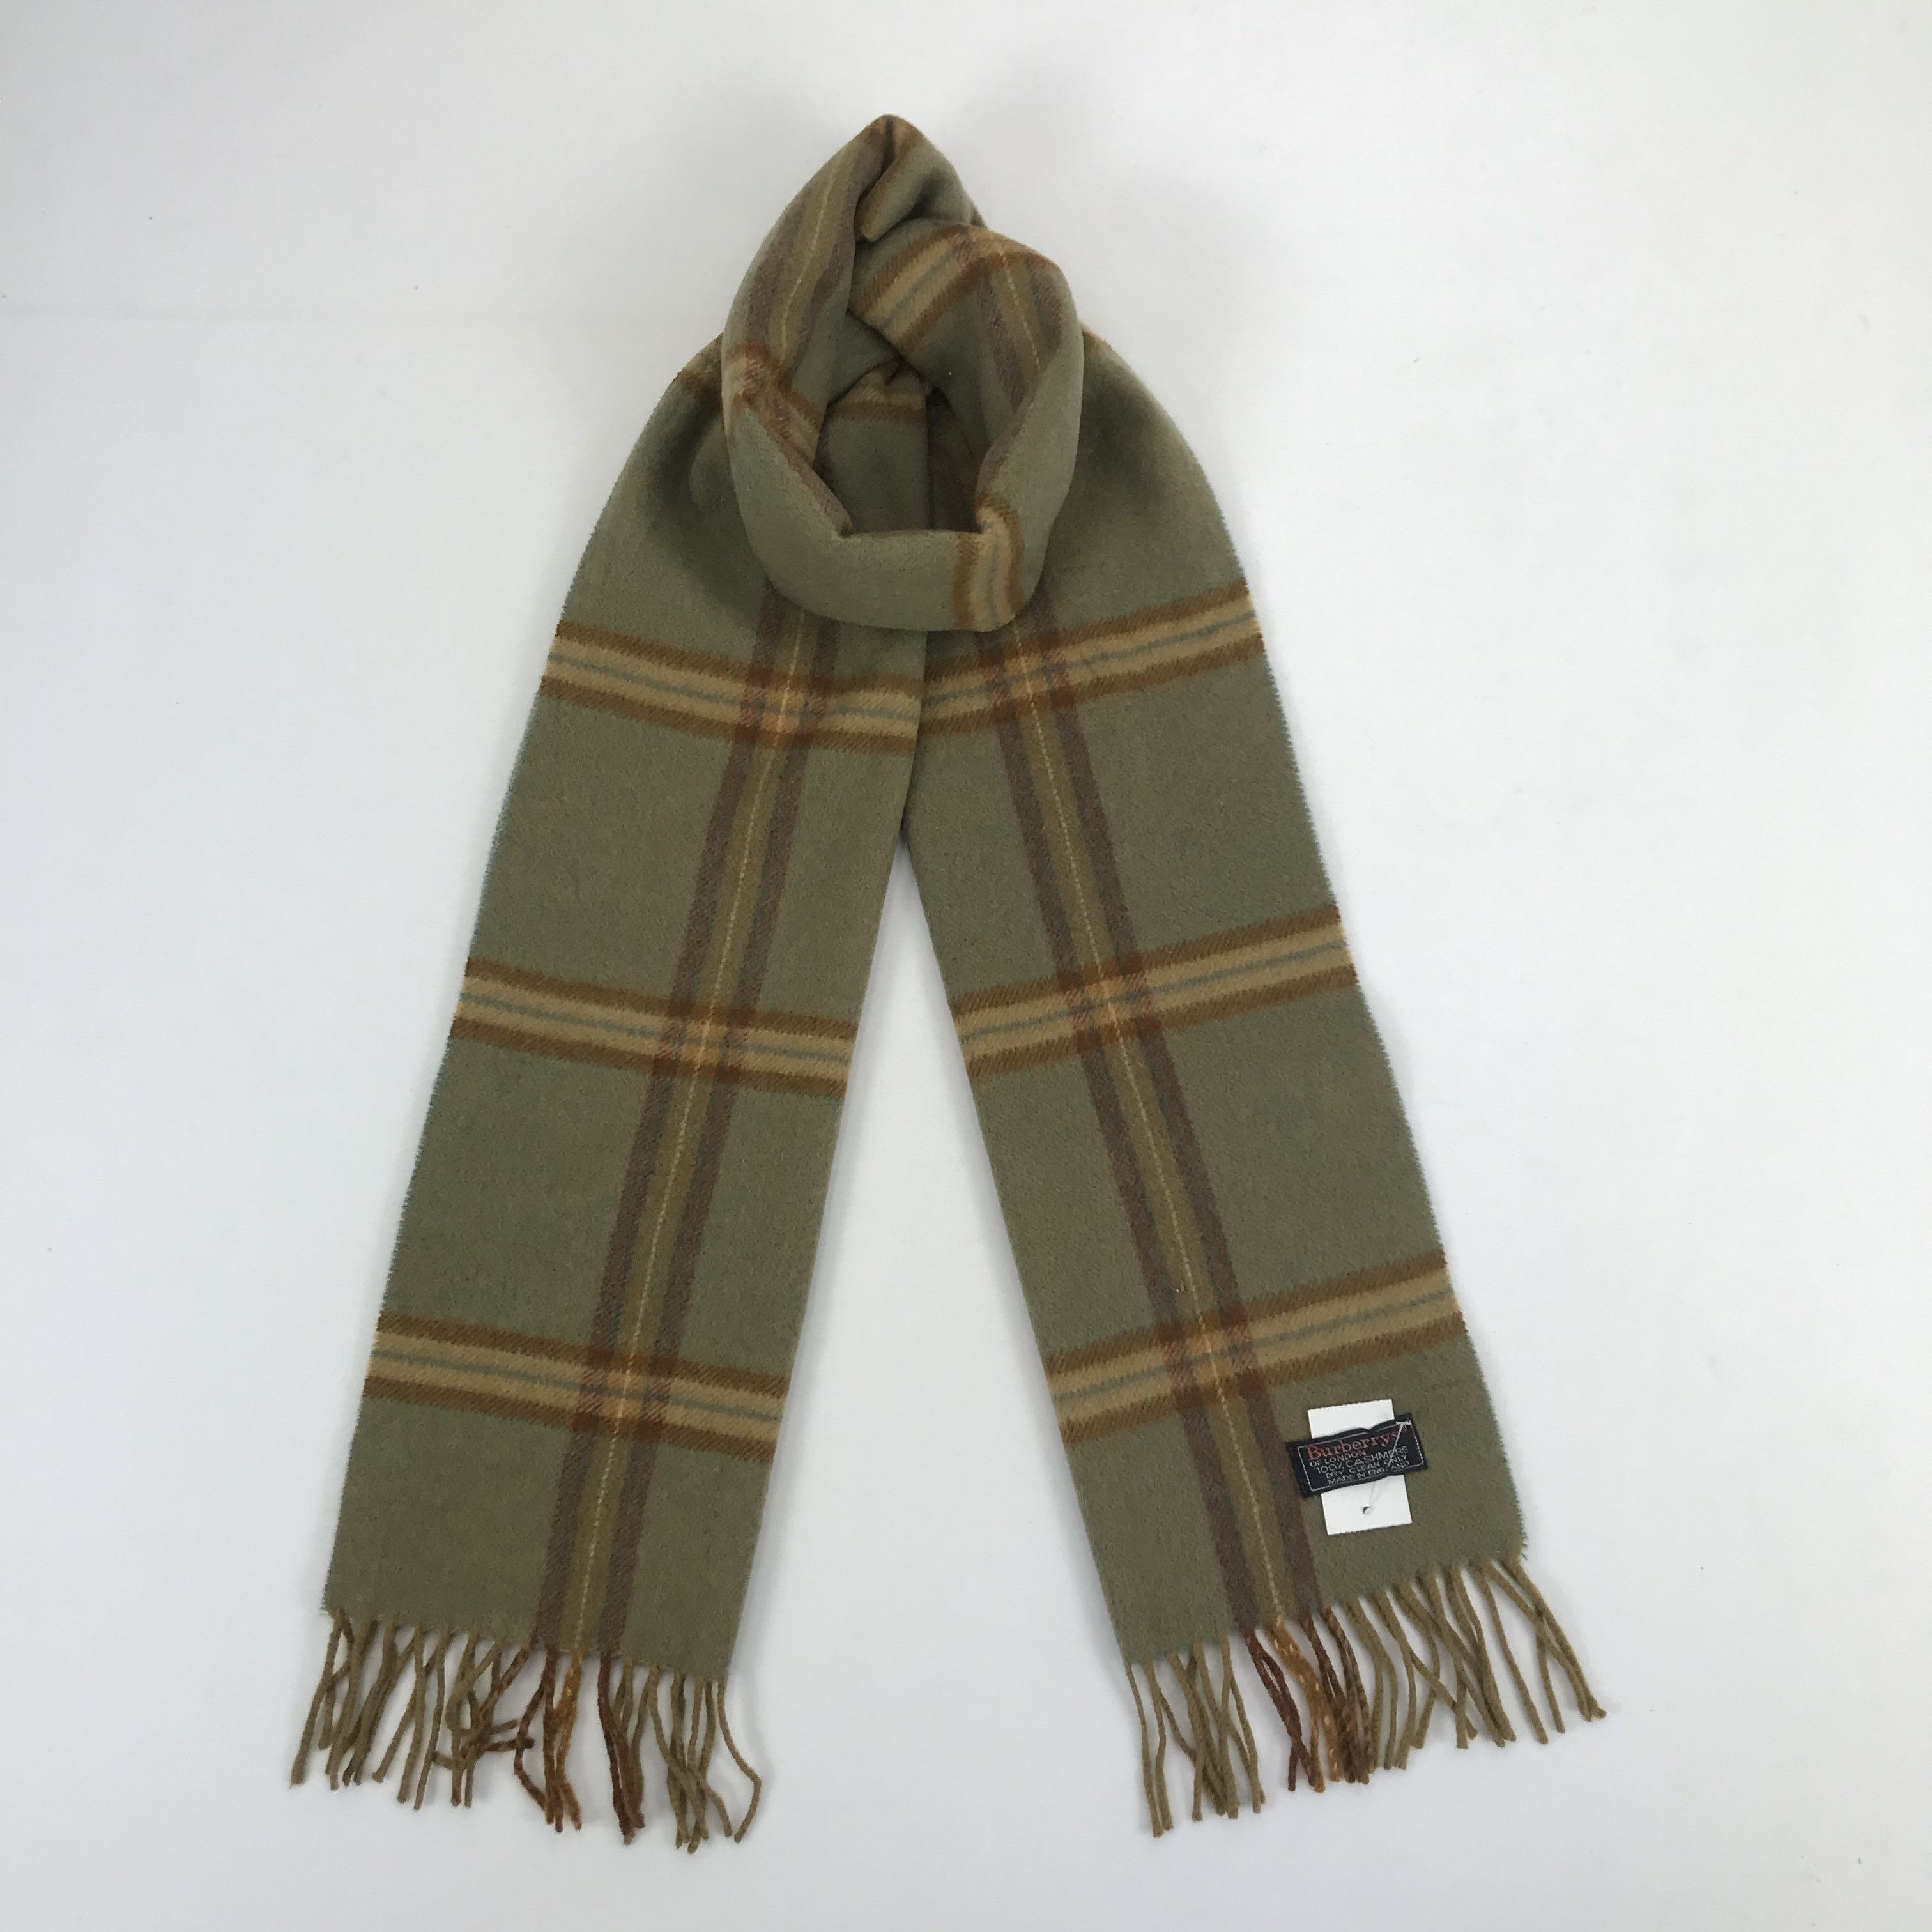 Vintage Vintage Burberry Scarf Muffler Cashmere Scarves Size ONE SIZE - 1 Preview